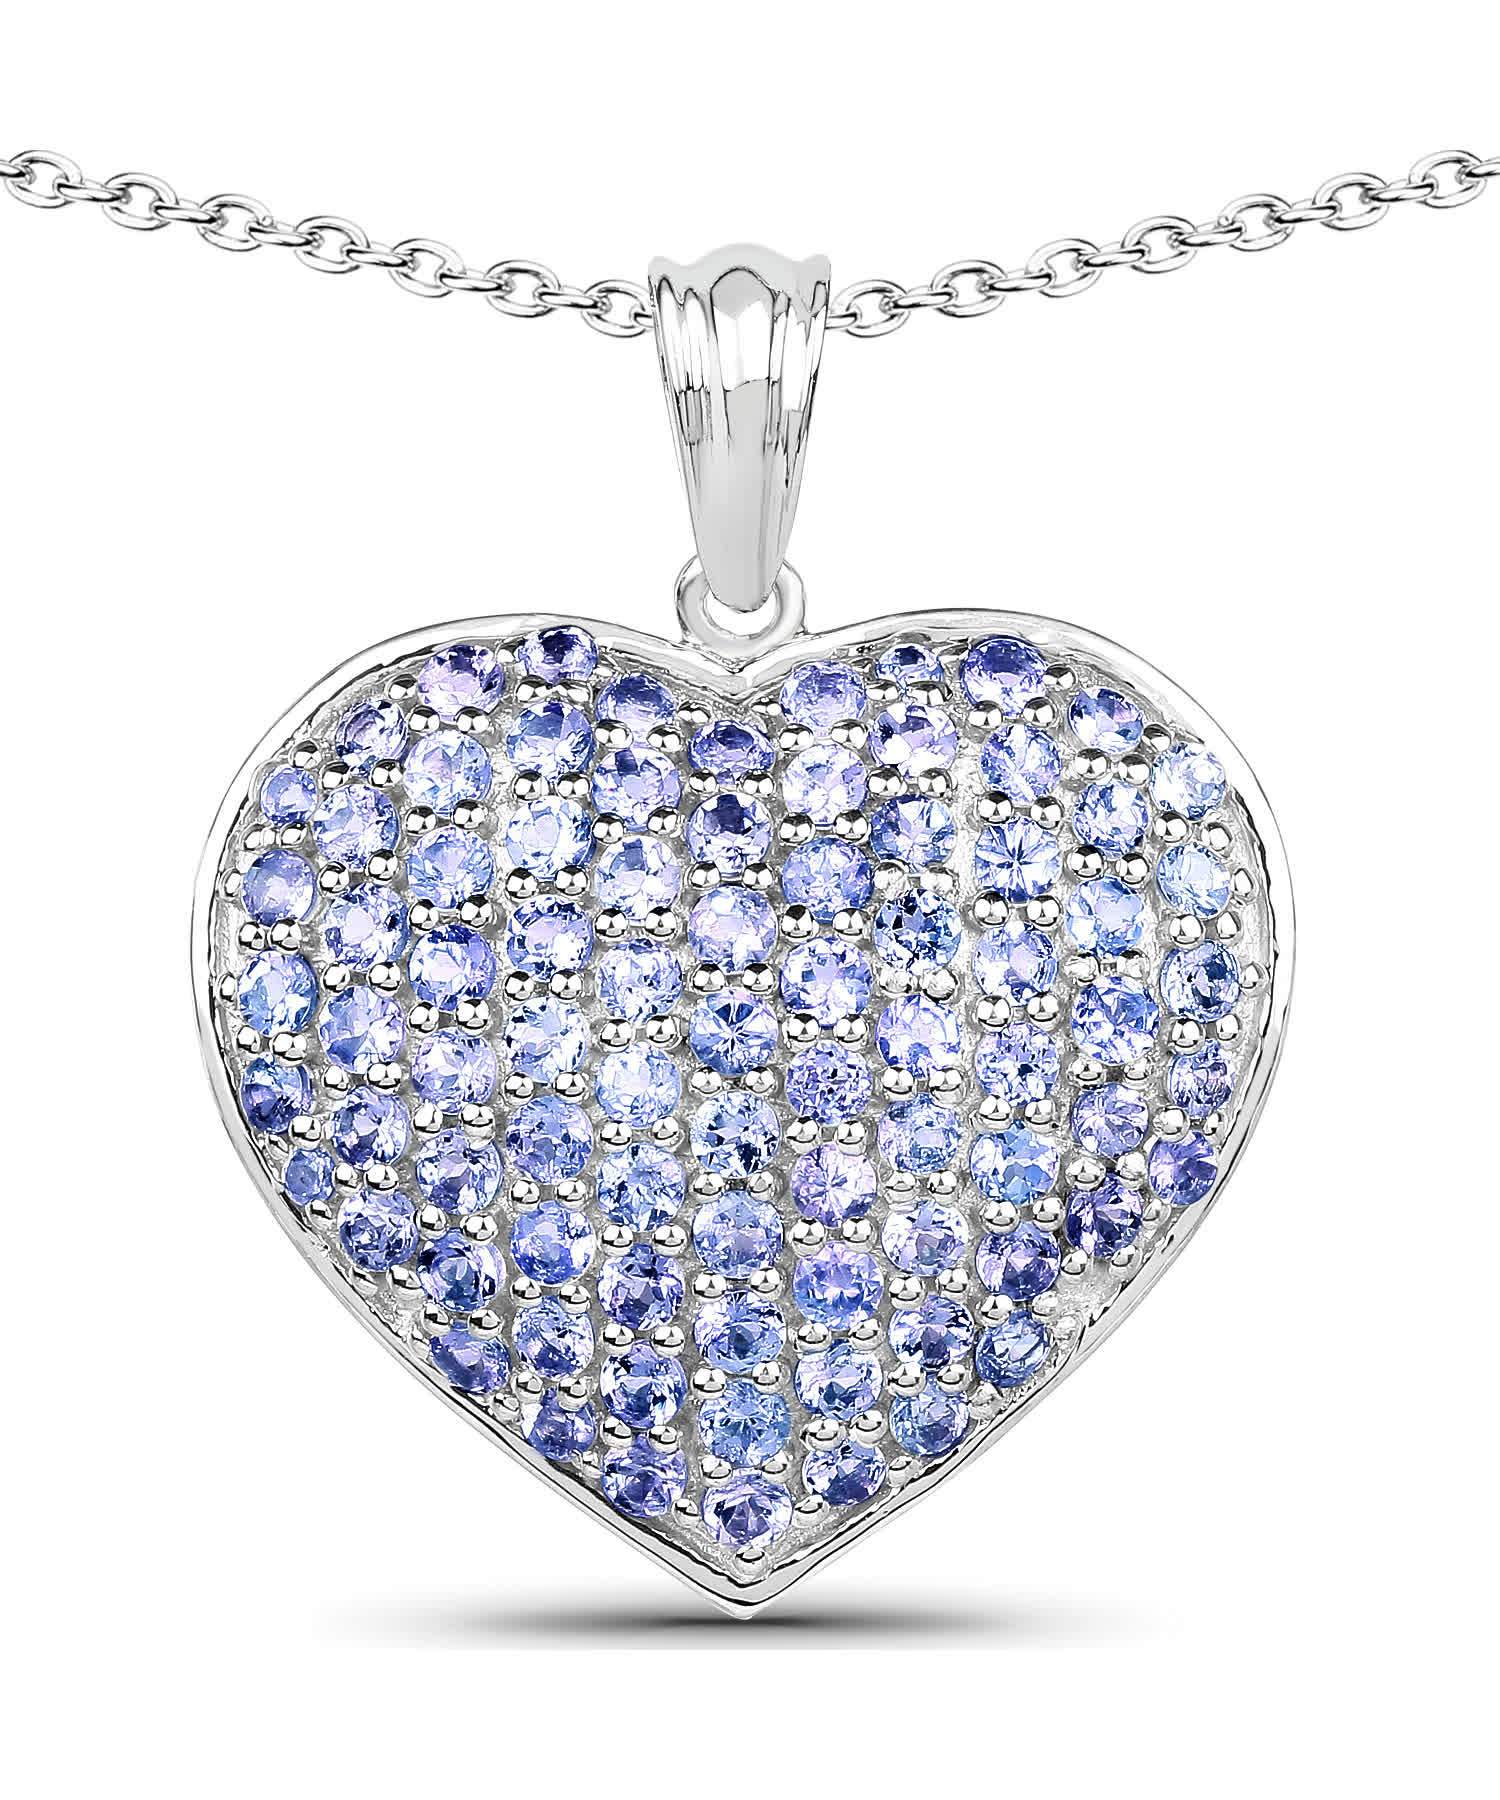 2.43ctw Natural Lavender Tanzanite Rhodium Plated 925 Sterling Silver Heart Pendant With Chain View 1